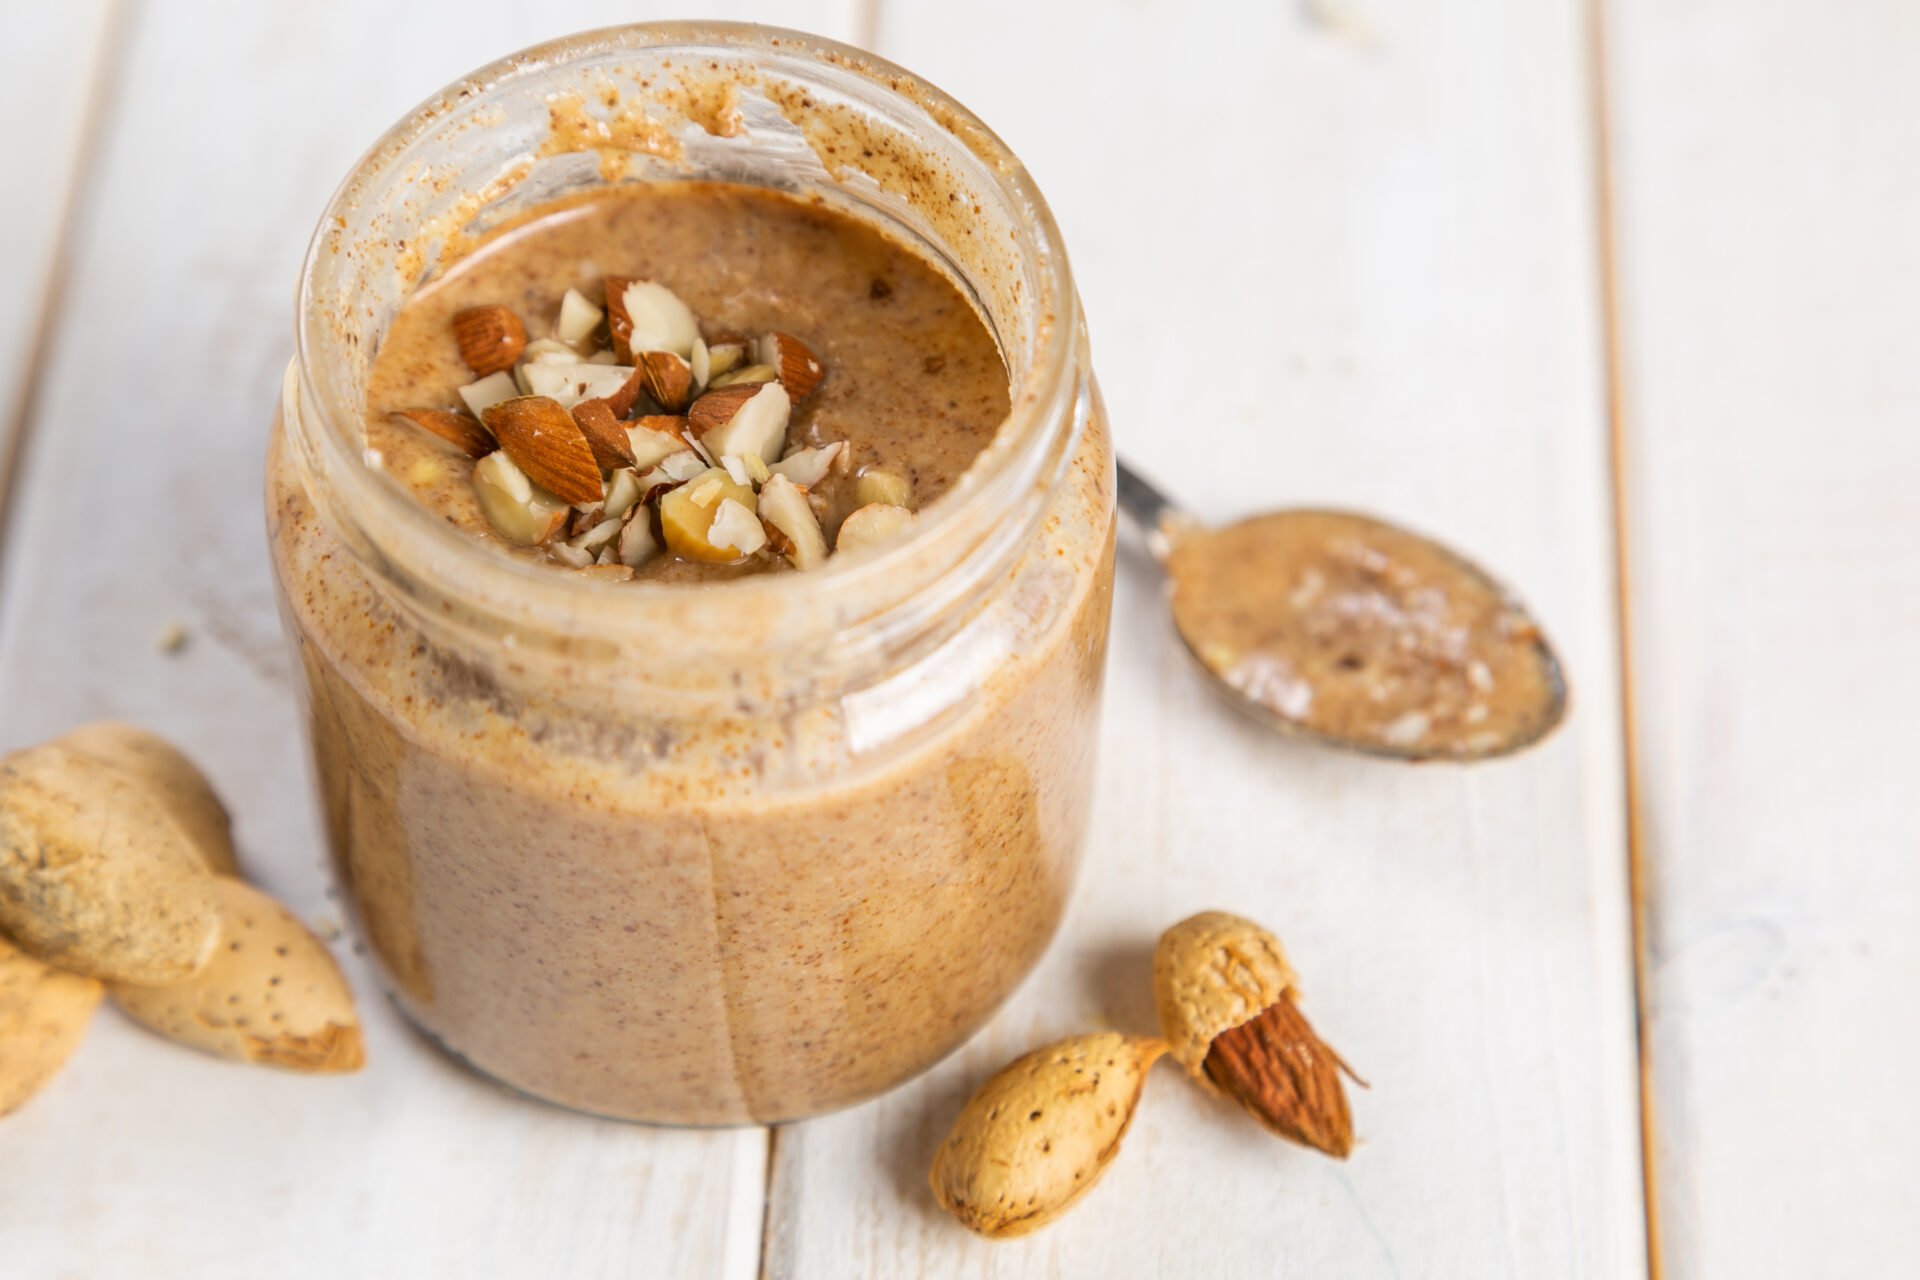 Best Peanut Butter & Other Nut Butters Sans Toxic PFAS Purchasing Guide